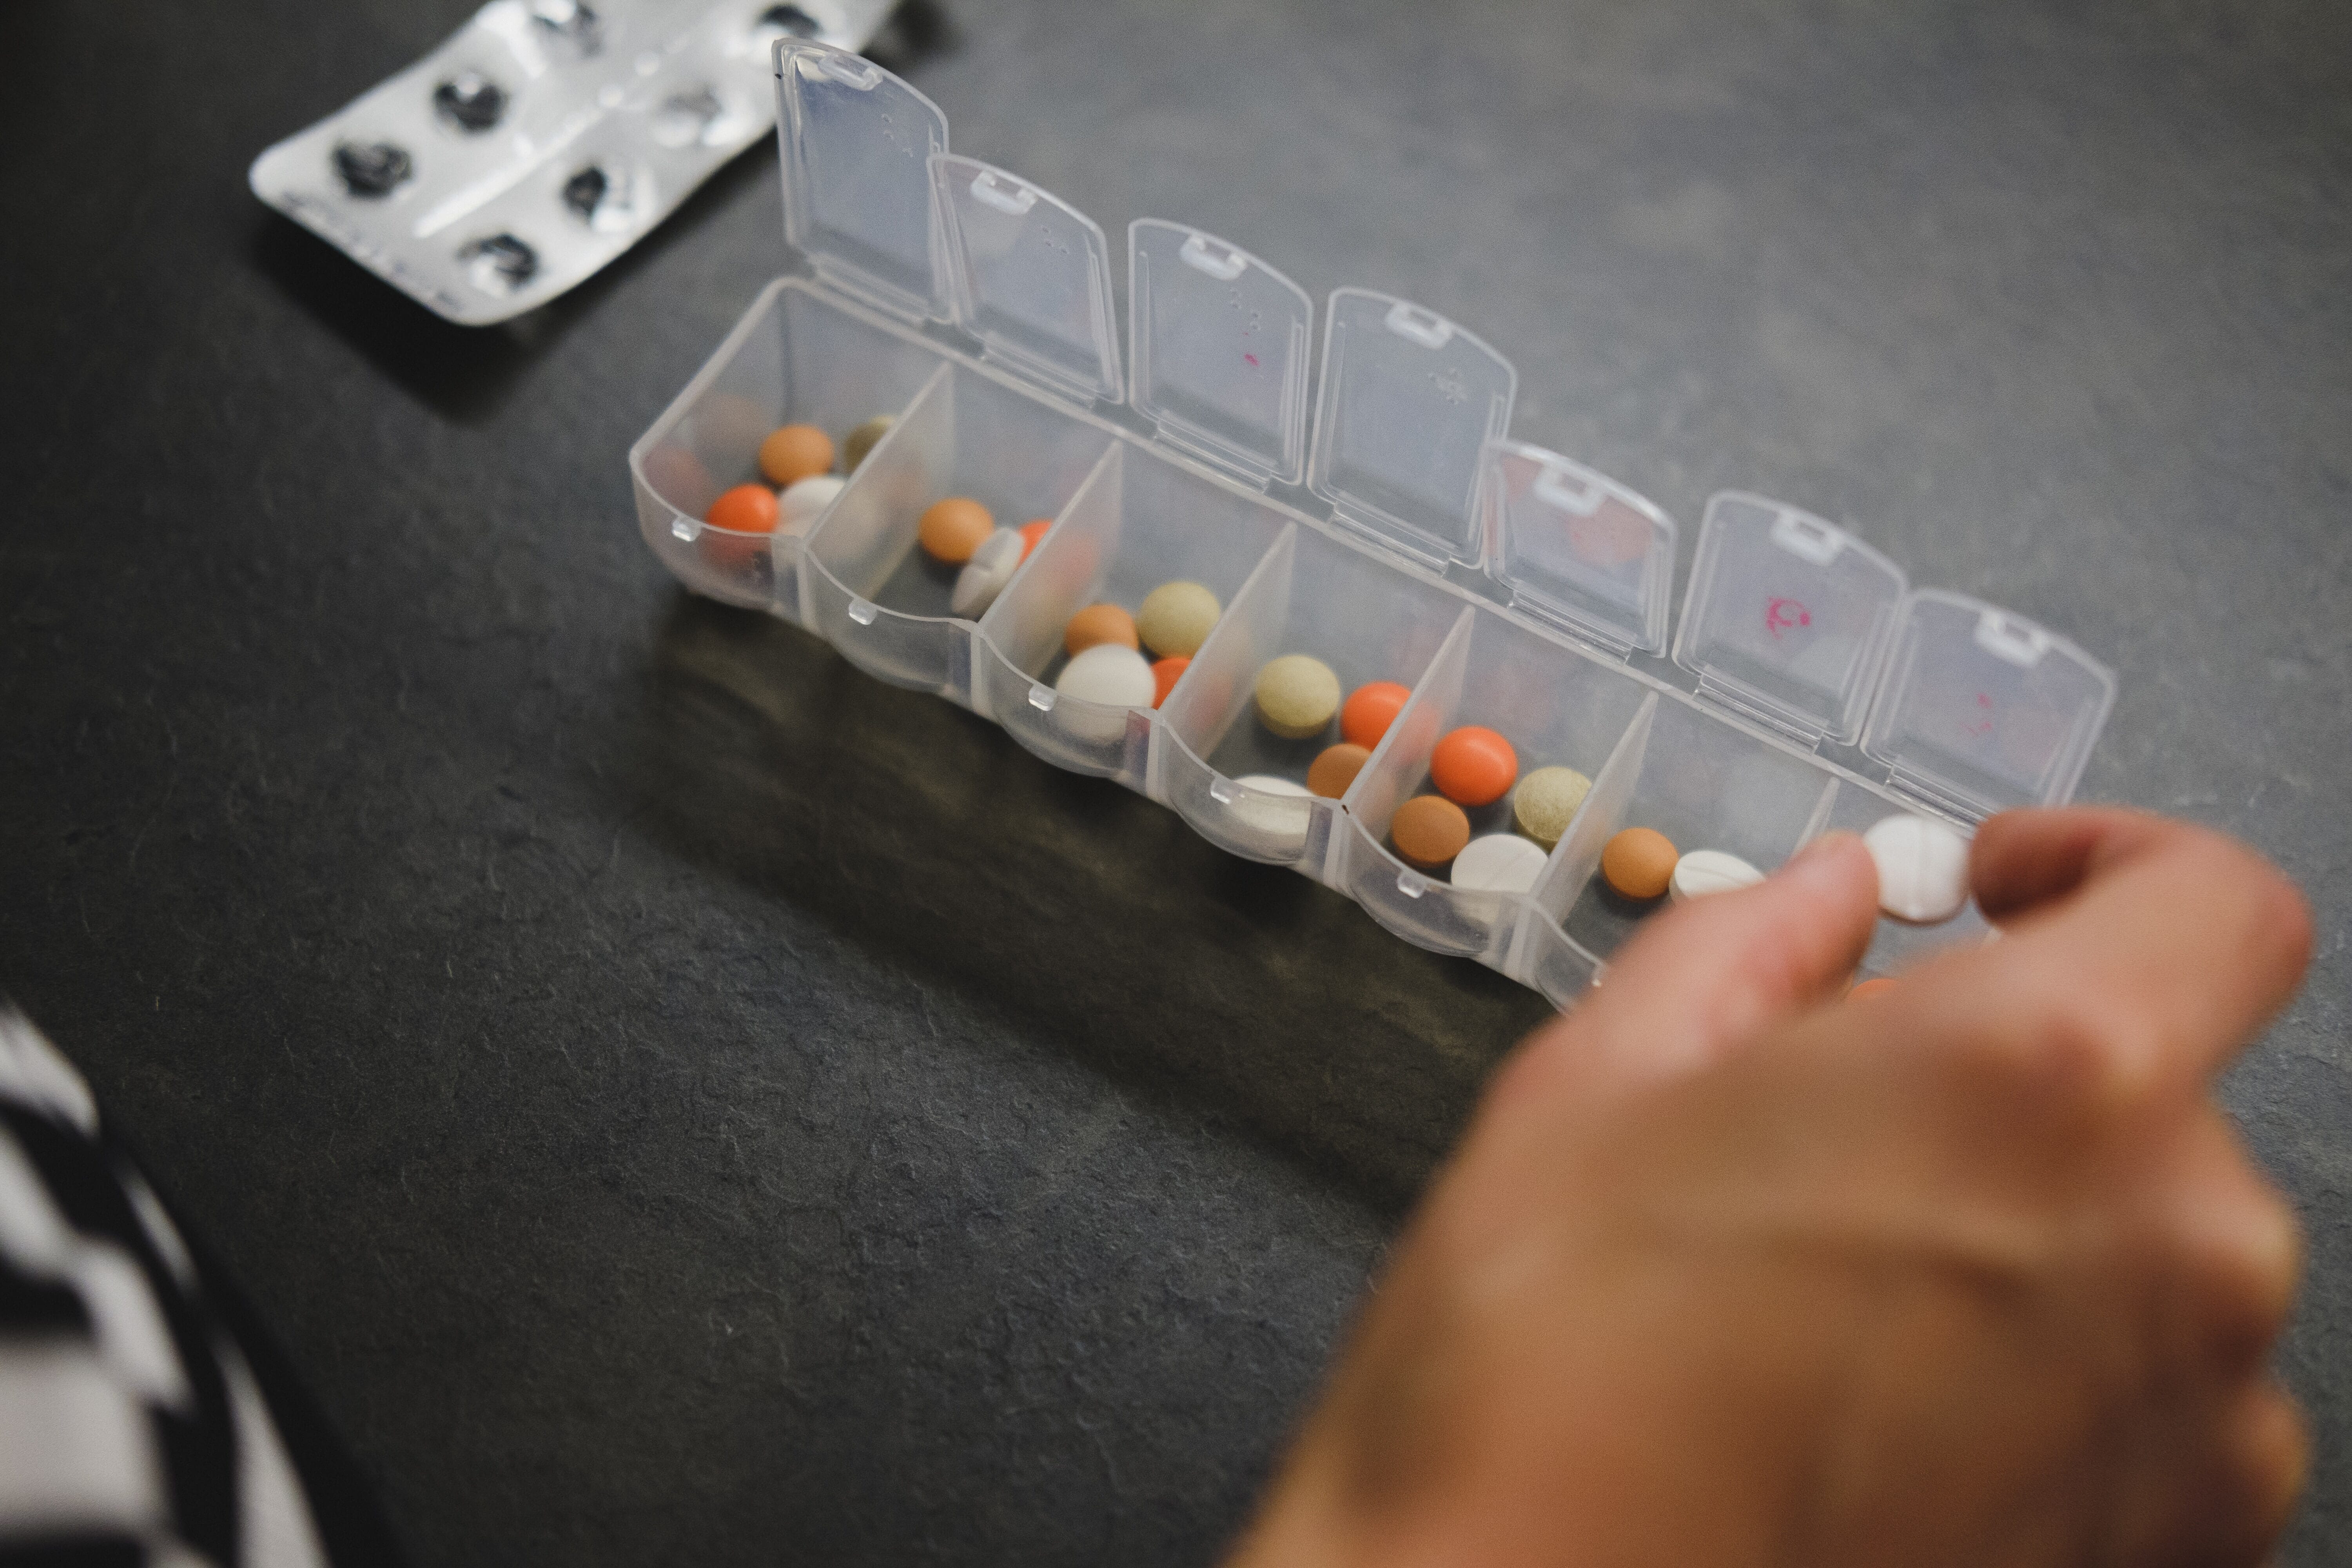 daily pill case full of ivf medications and fertility supplements